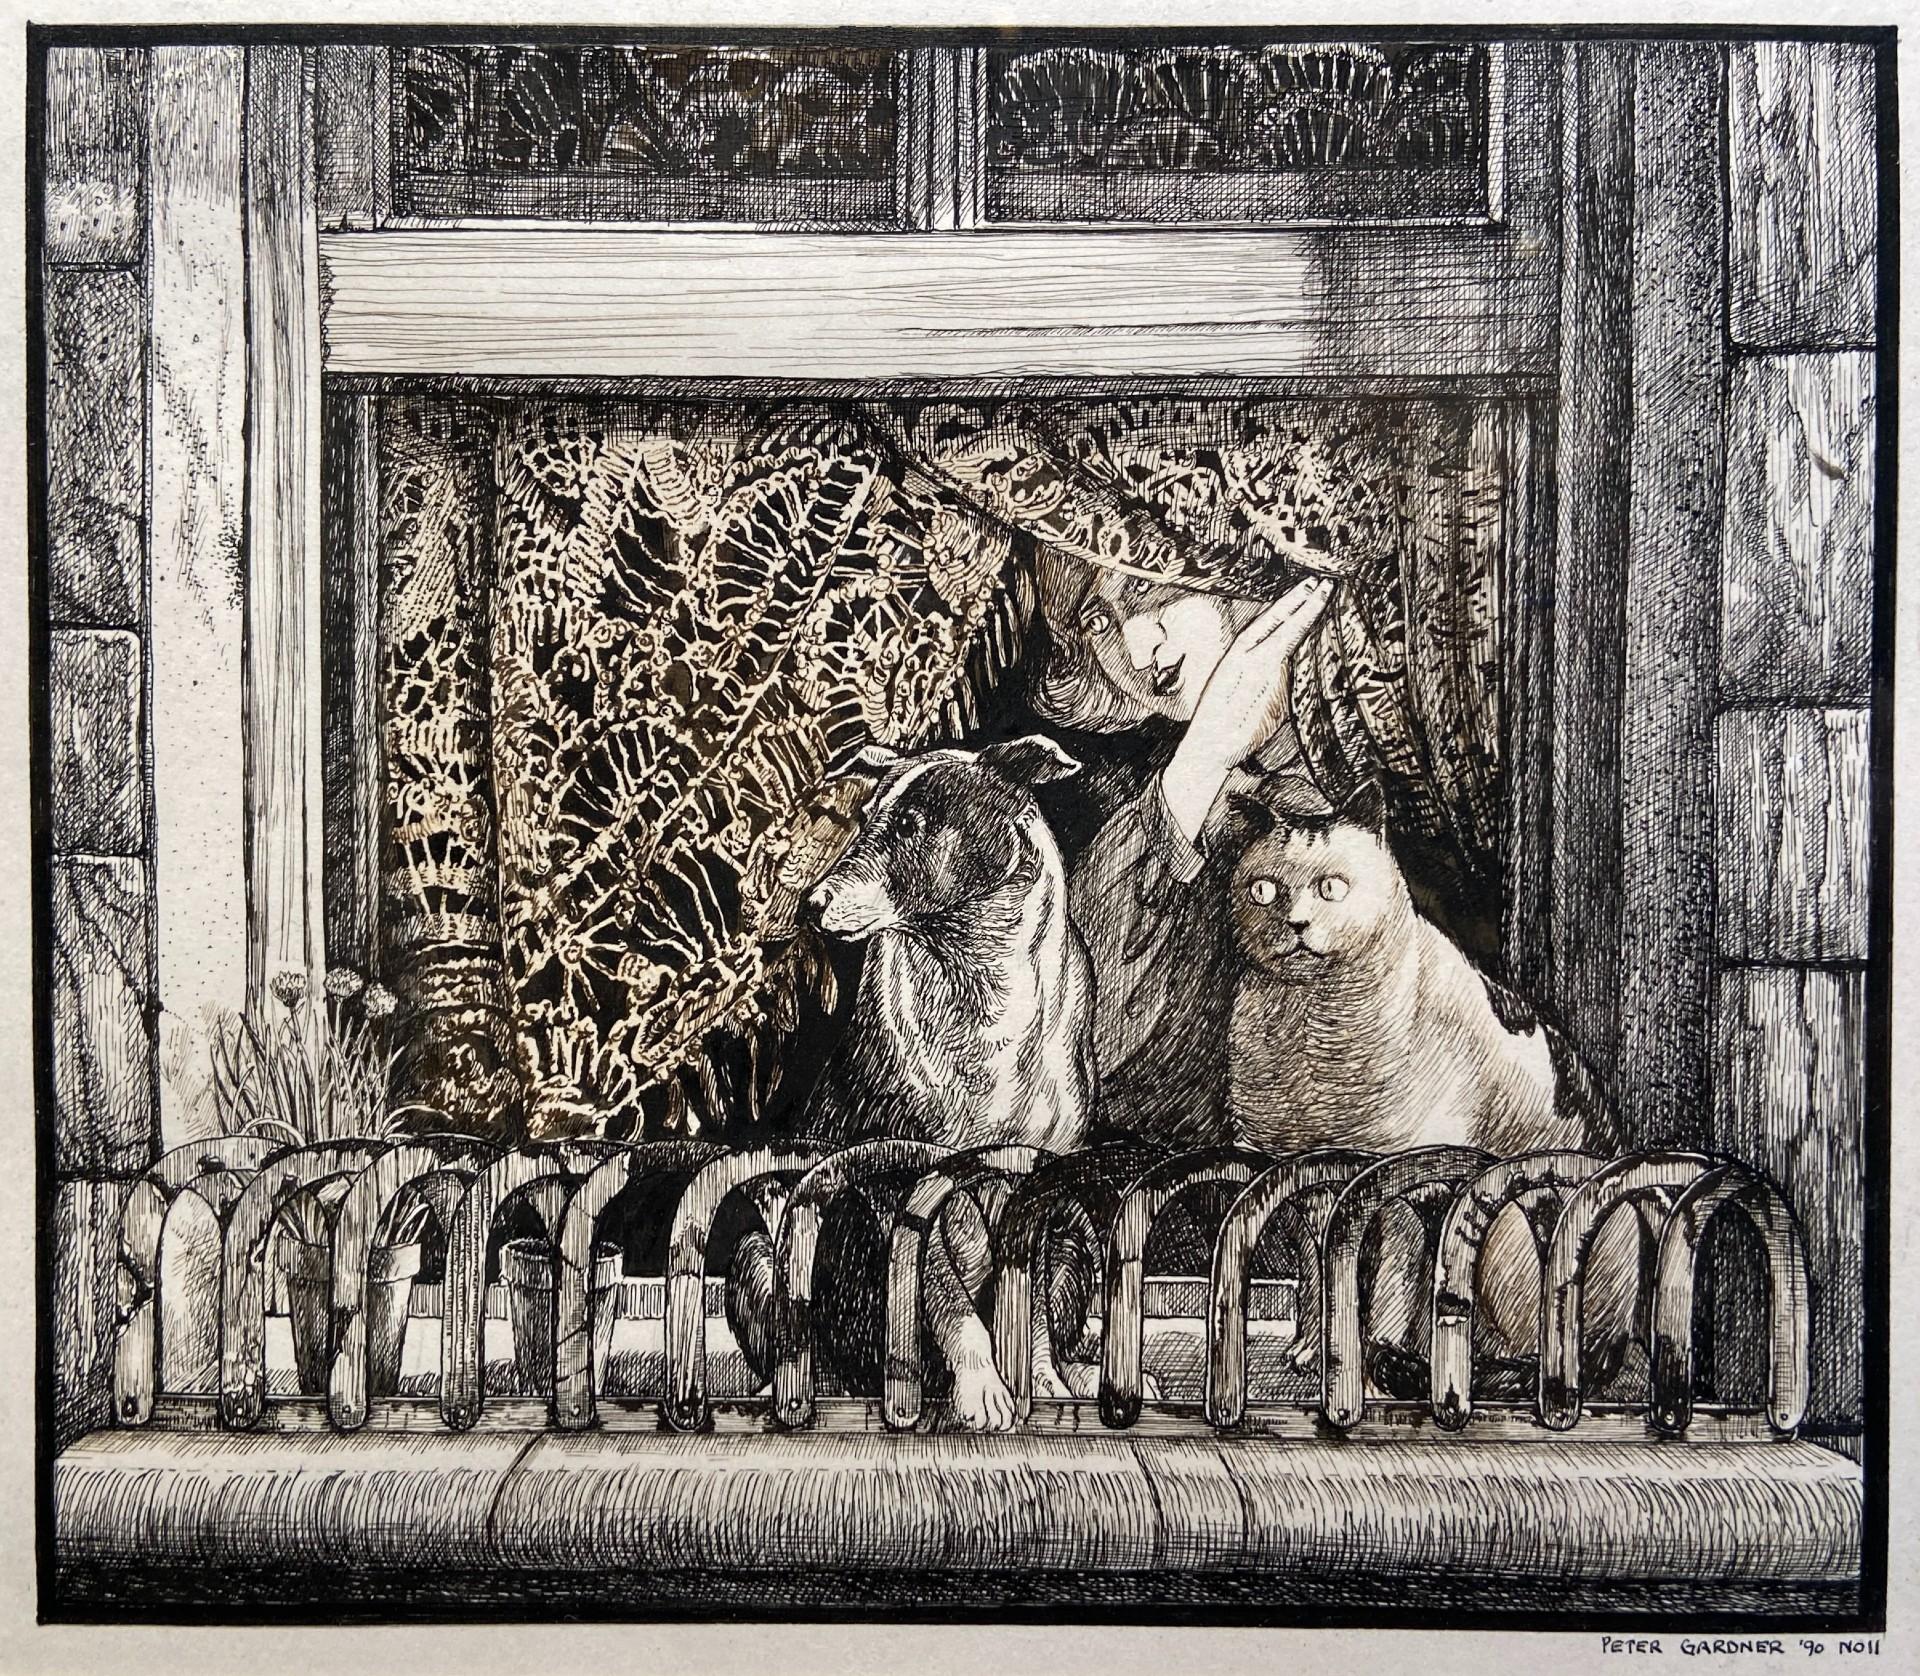 Peter Gardner Figurative Art - The Watchers, Pen and Ink Drawing, 20th Century British School, Signed 1990